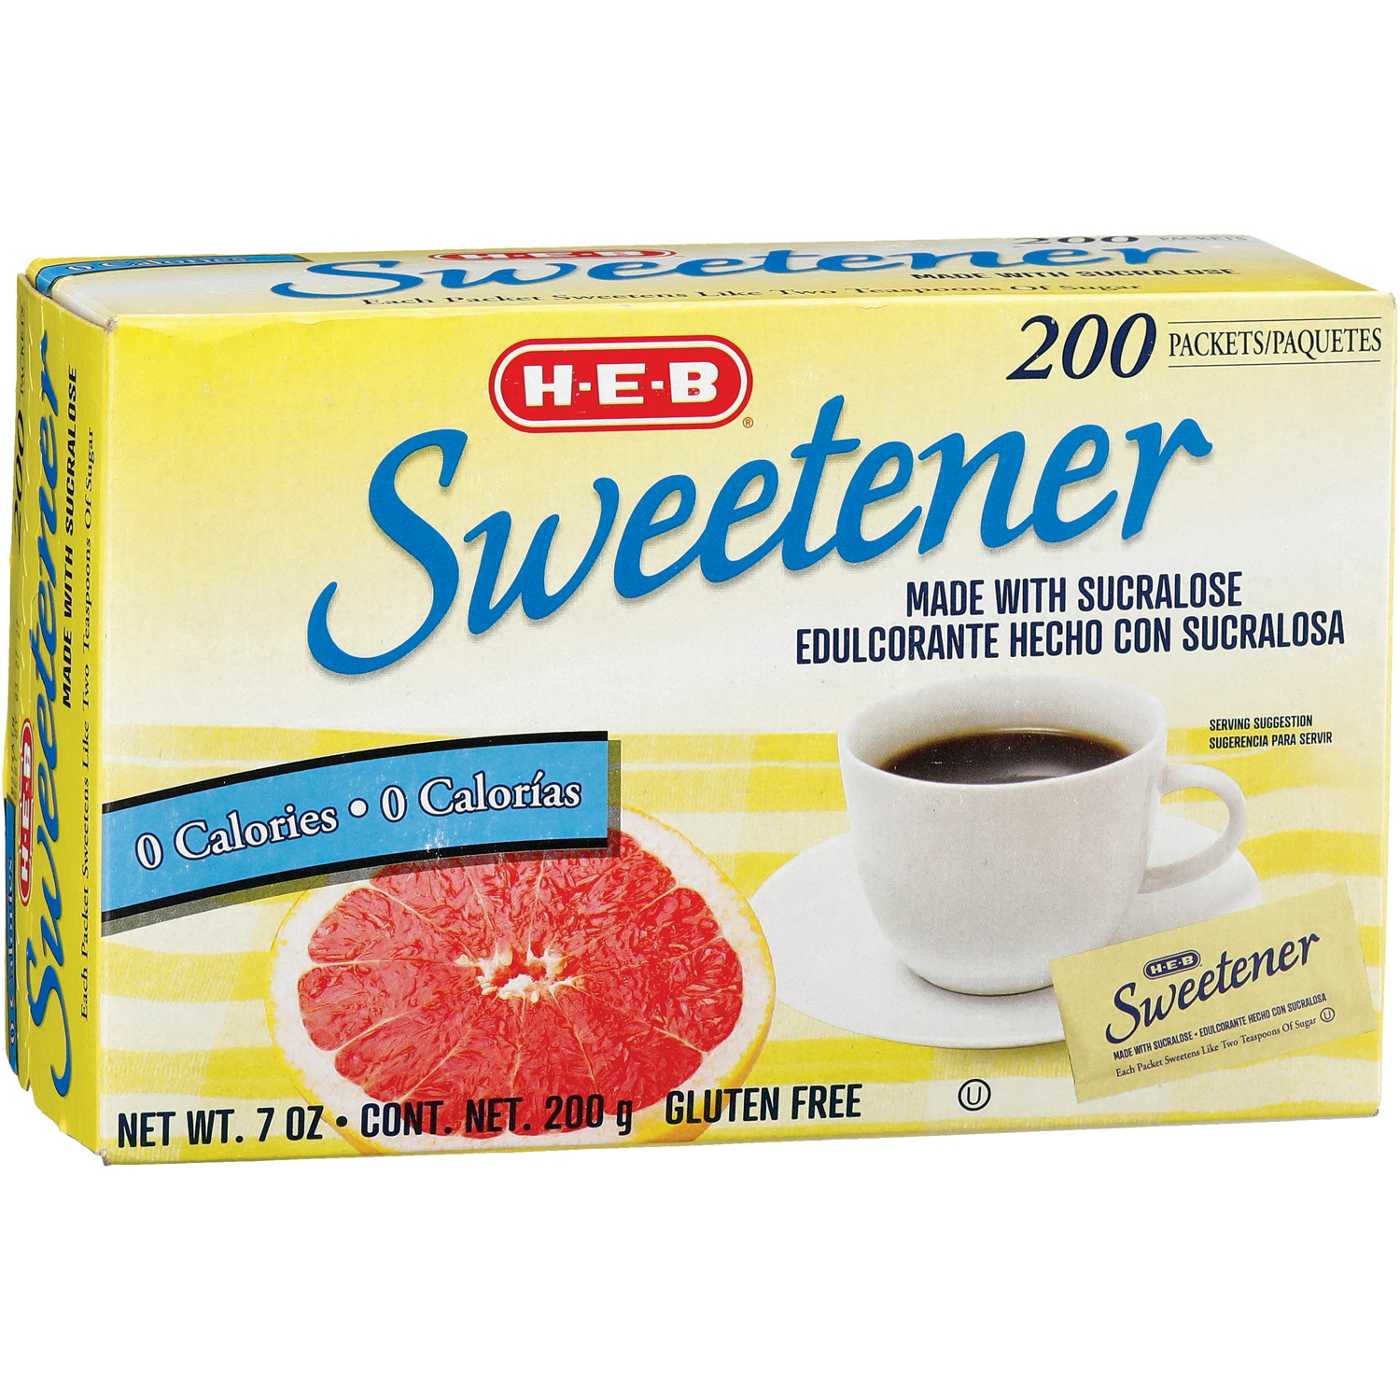 H-E-B Sucralose Sweetener Packets; image 2 of 2